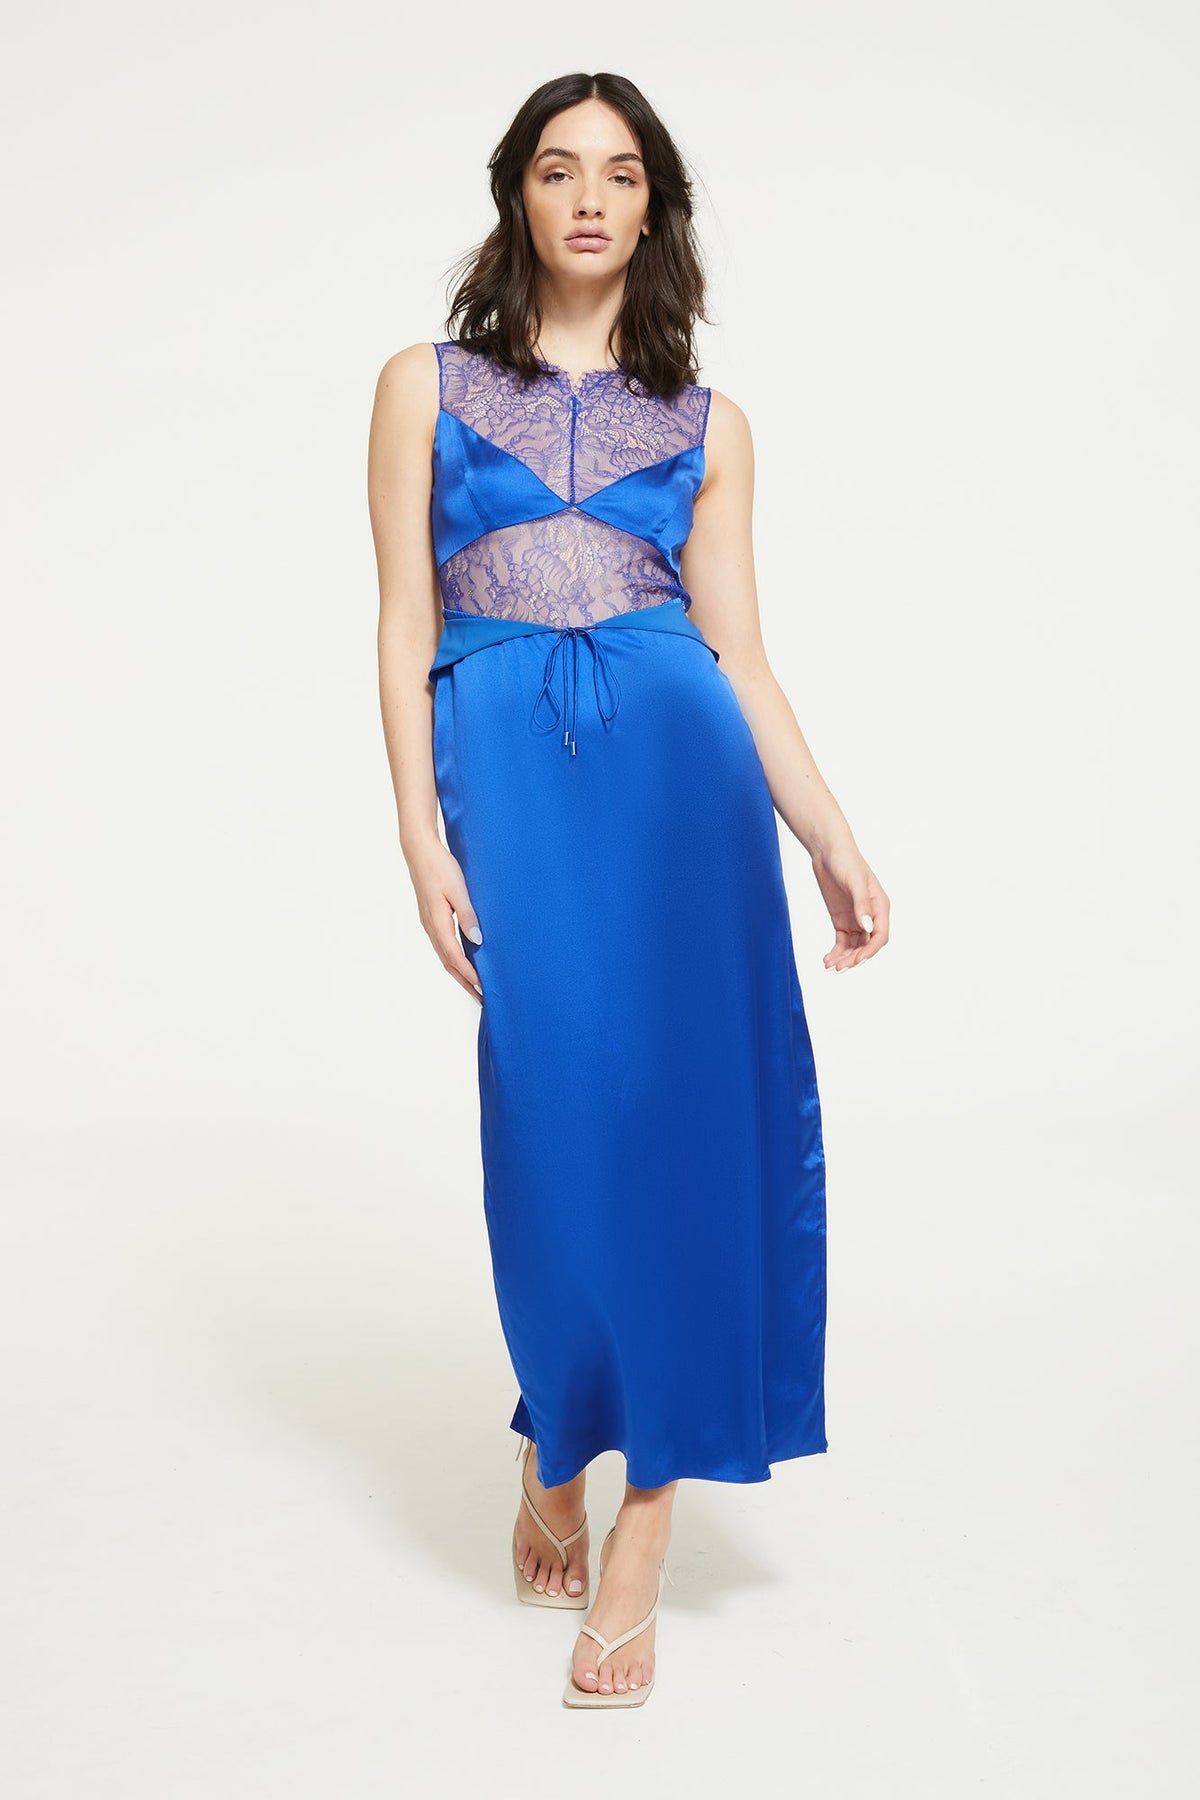 The Amour Midi Dress in Ultra Blue from Ginia RTW